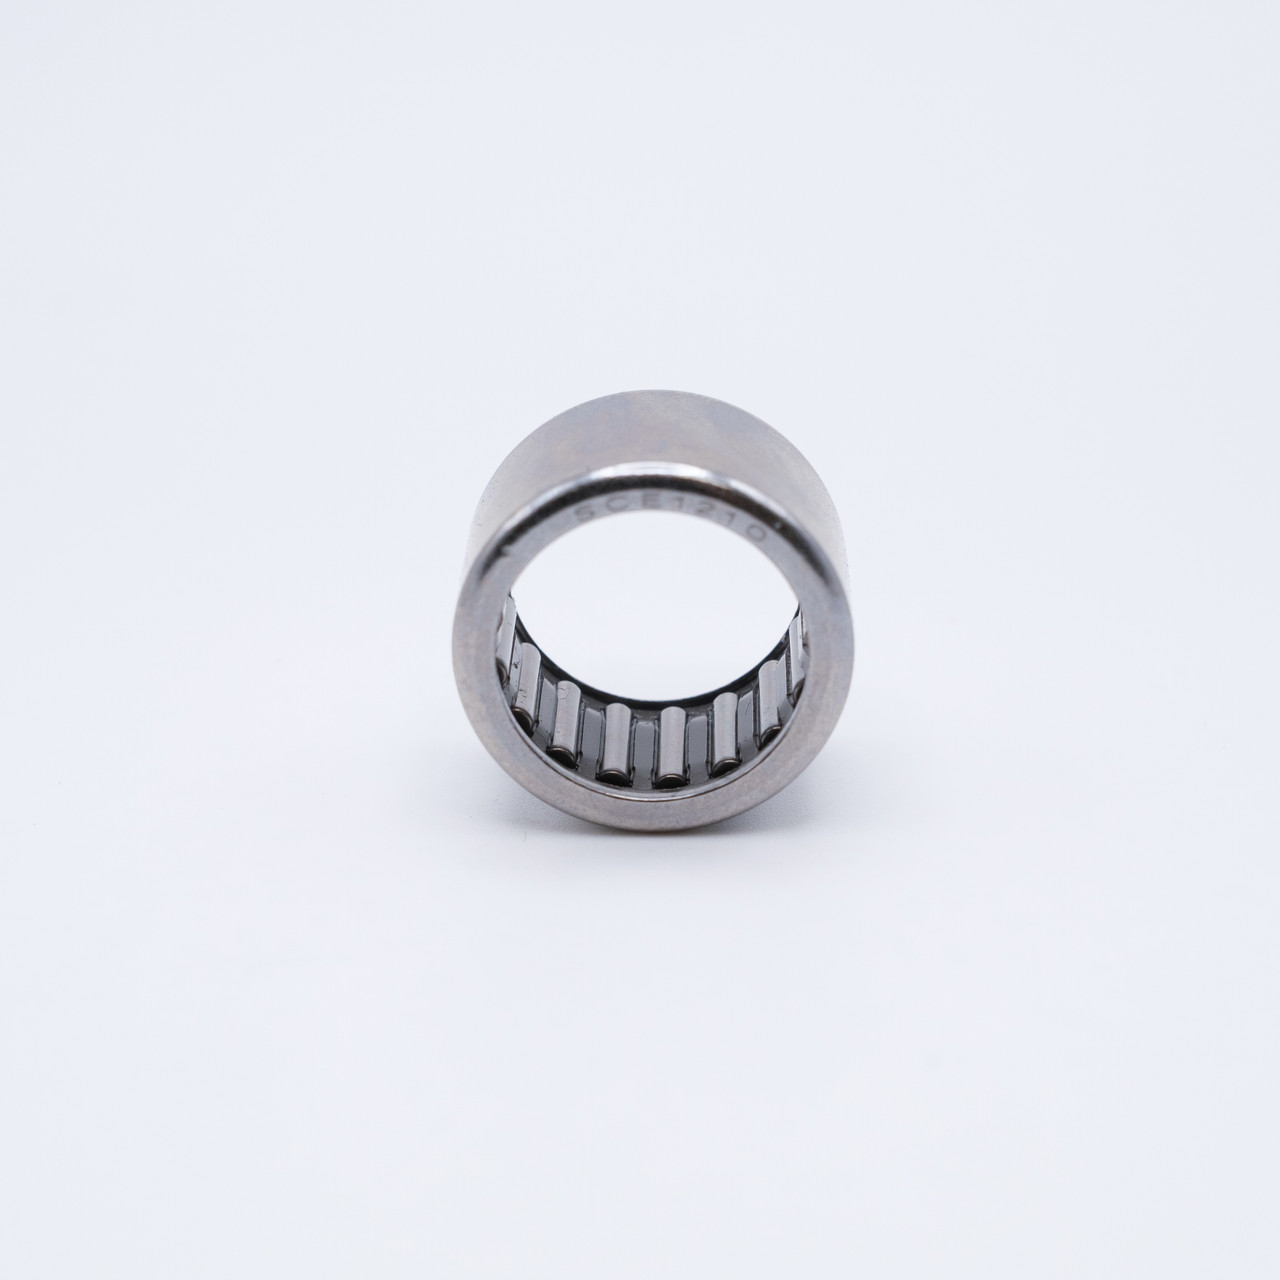 J-1716 Needle Rollers Bearing 1-1/16x1-5/16x1 Inches Front View